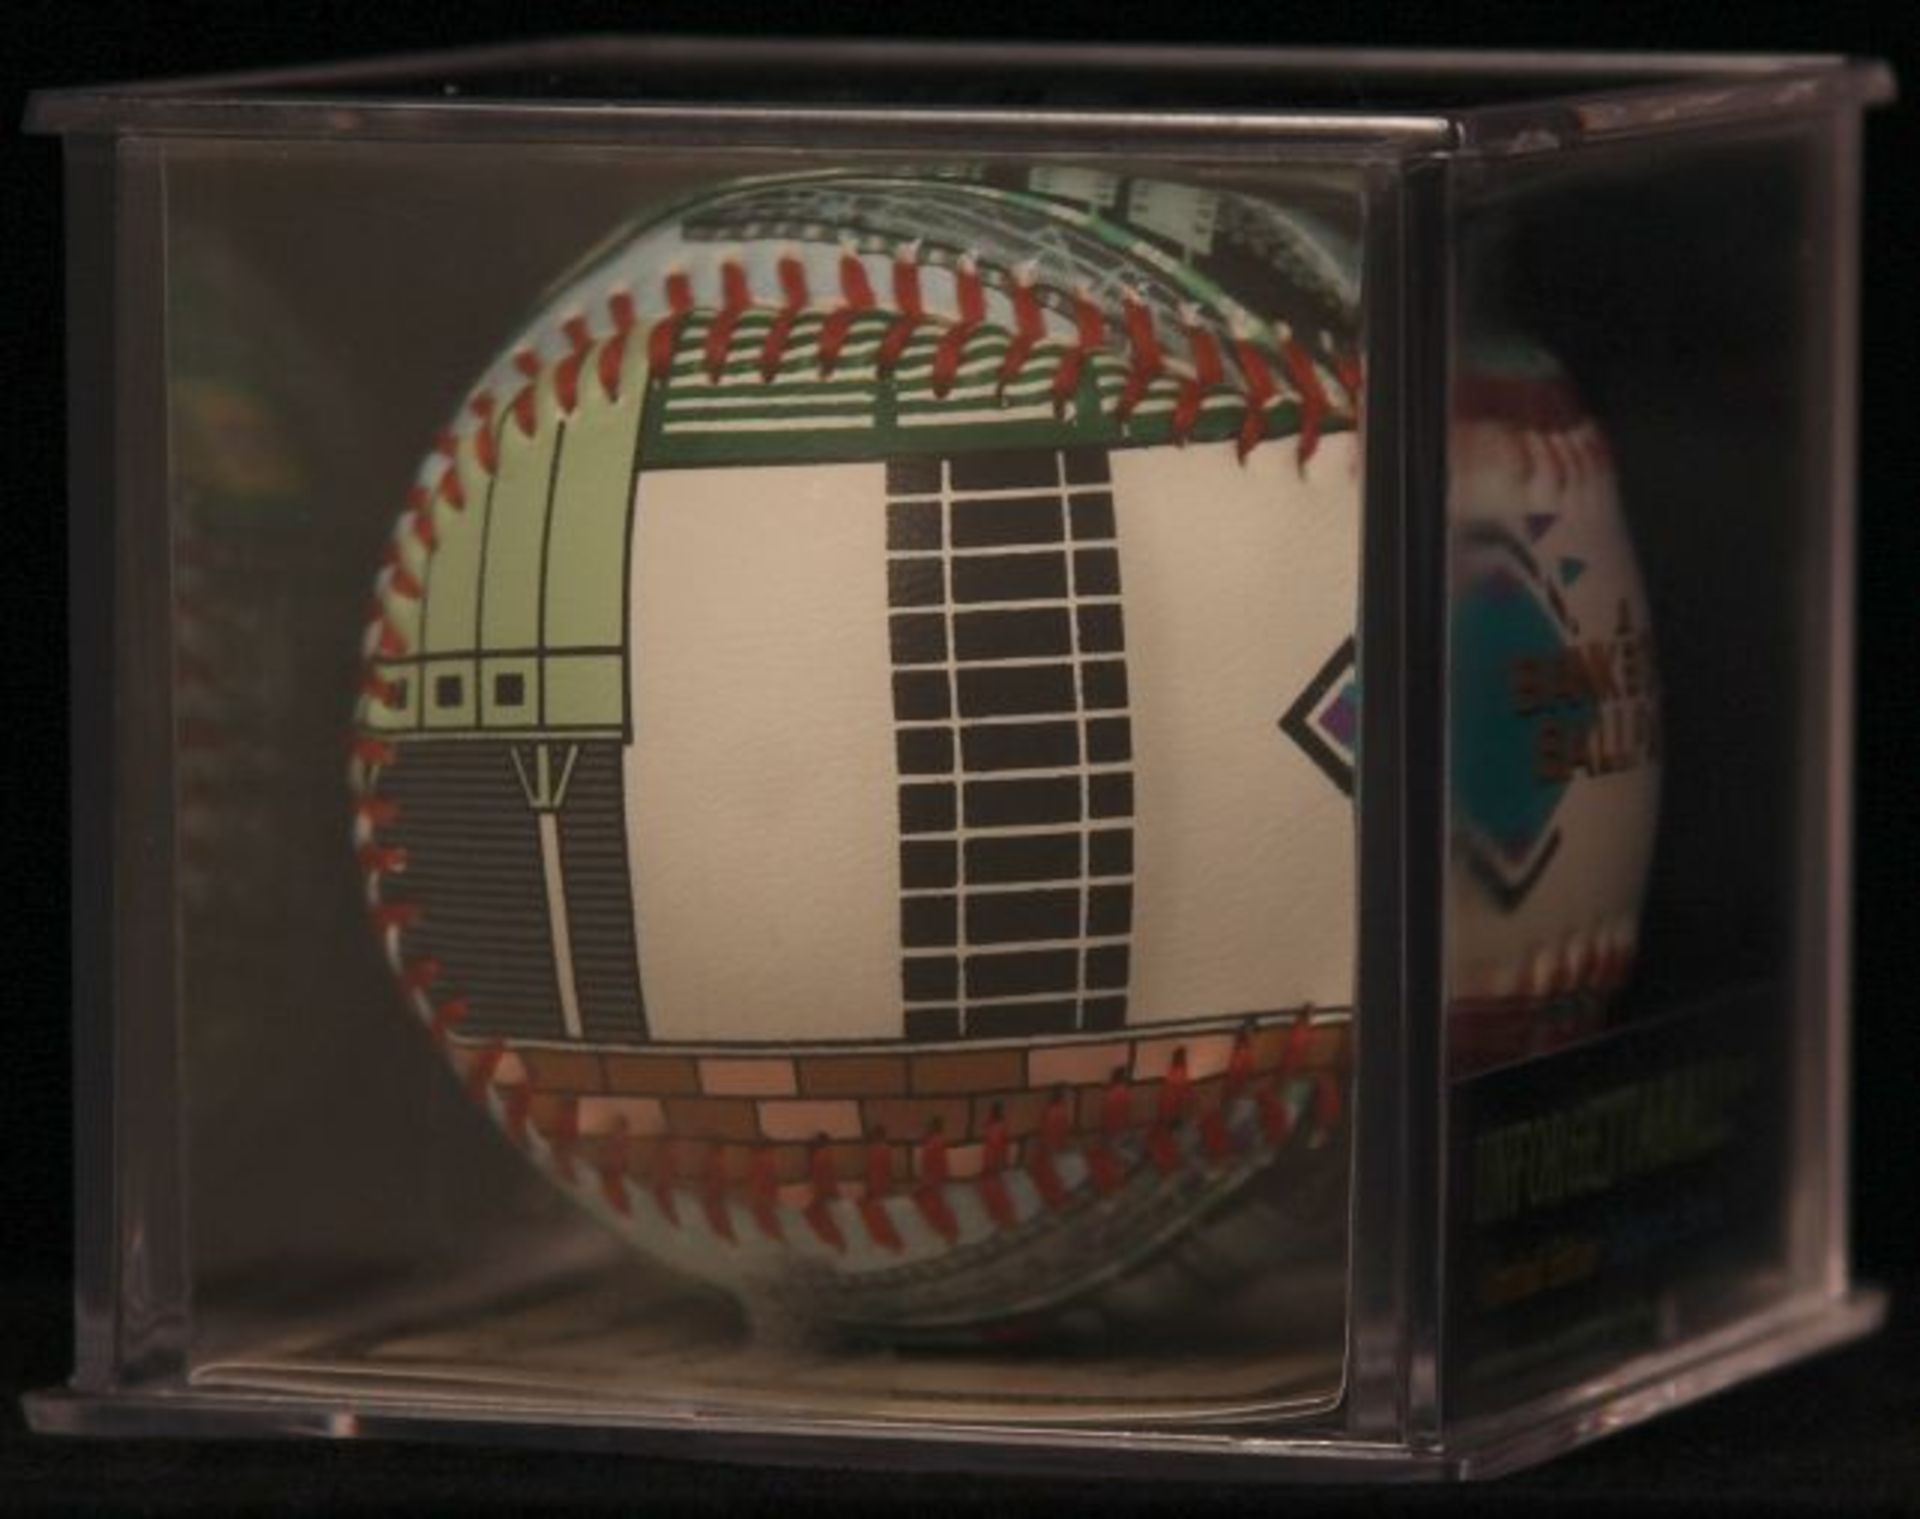 Unforgettaball! "Bank One Ballpark" Collectable Baseball - Image 2 of 6